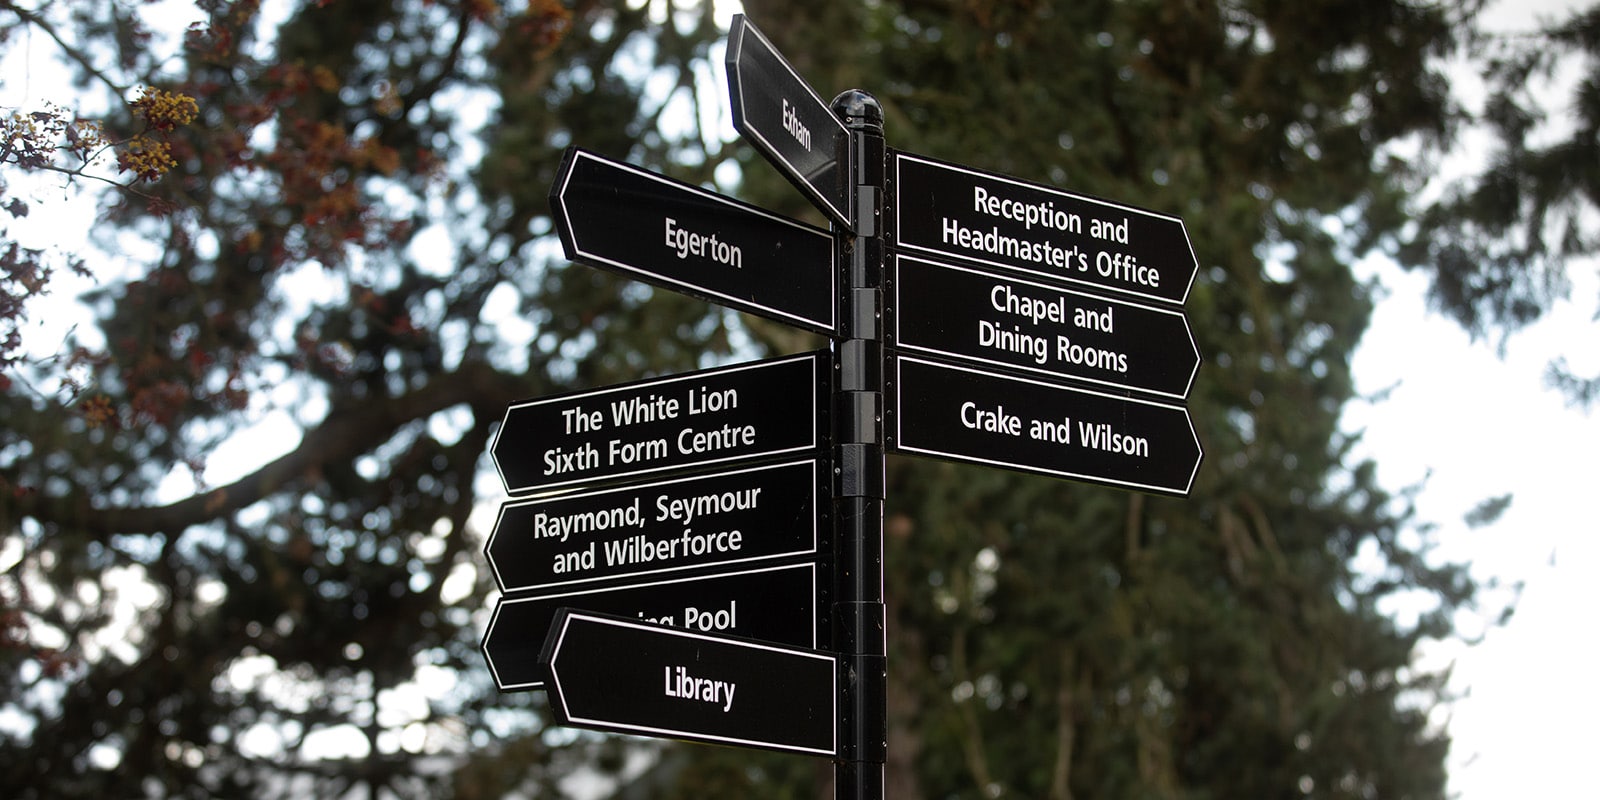 A sign to Bloxham classrooms, facilities and locations